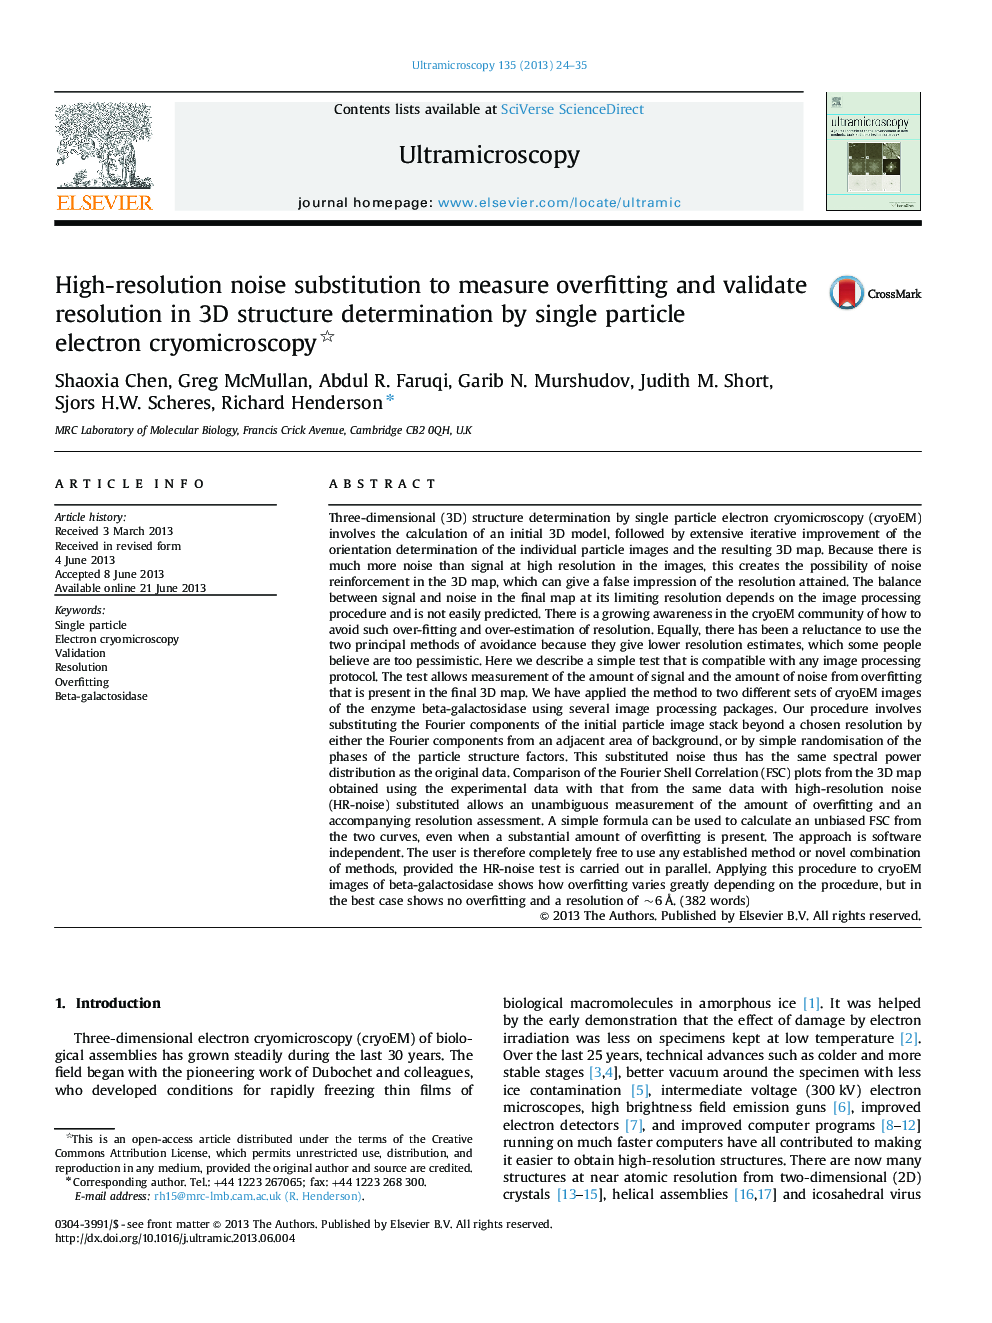 High-resolution noise substitution to measure overfitting and validate resolution in 3D structure determination by single particle electron cryomicroscopy